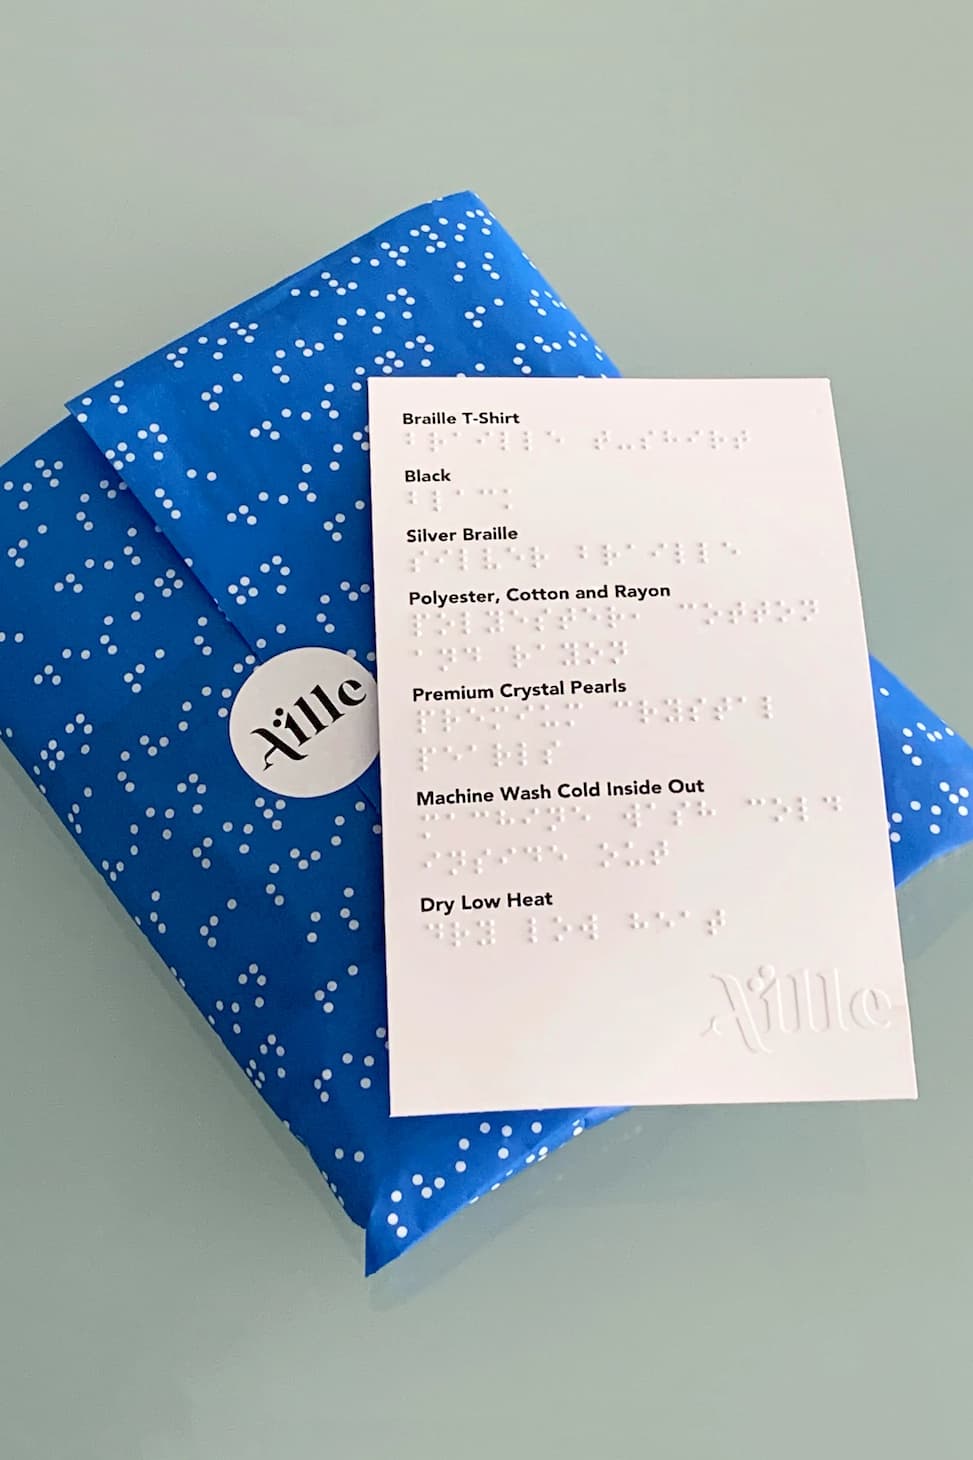 Braille tissue paper and braille accessible packaging product info card from Aille Design